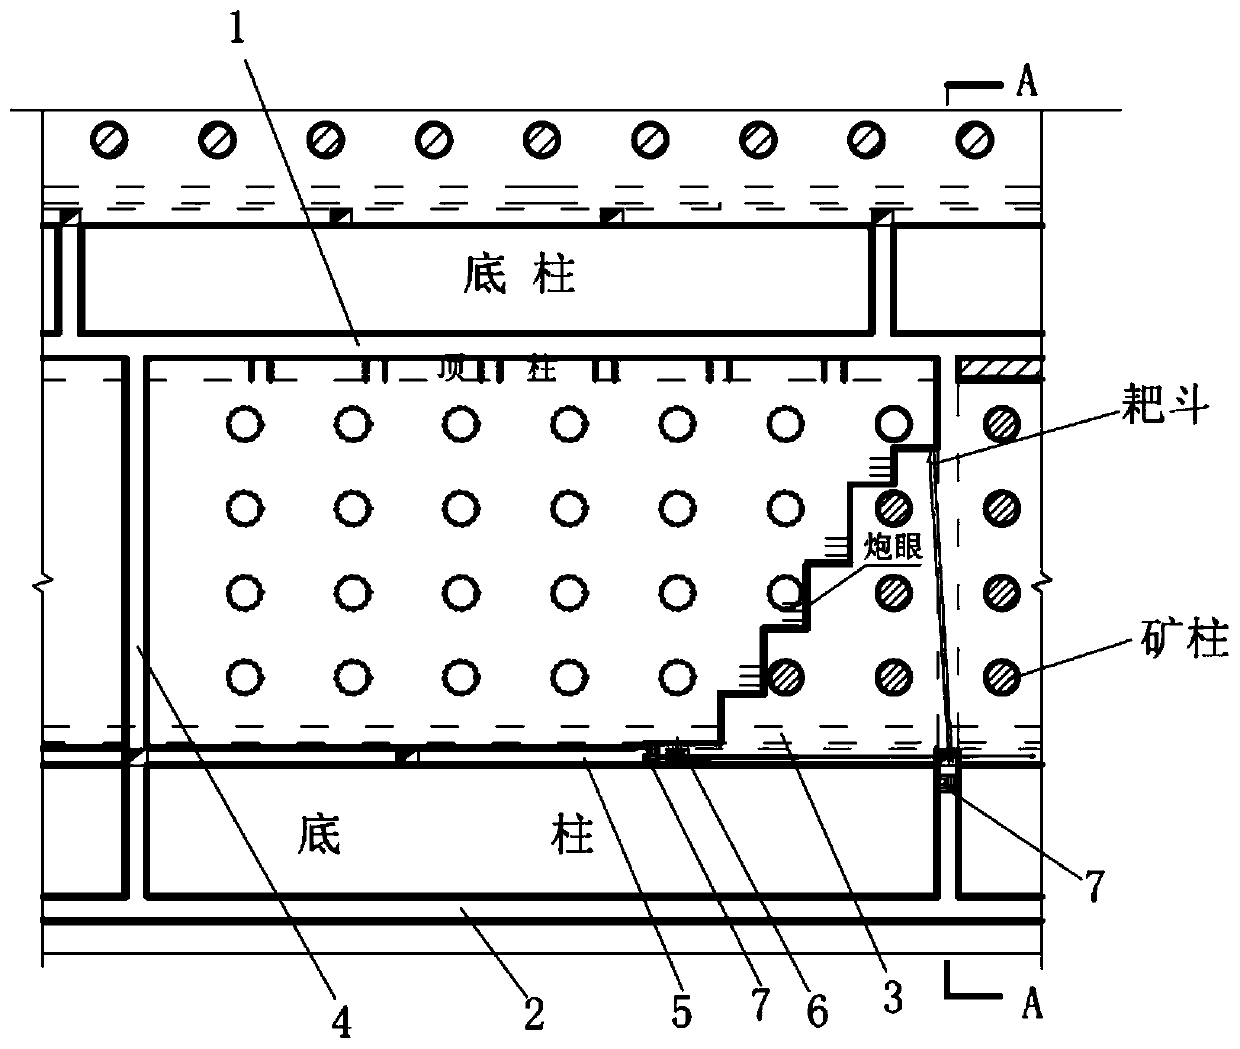 A method of backfilling mining pillars by using tailings mold bag walls in mines